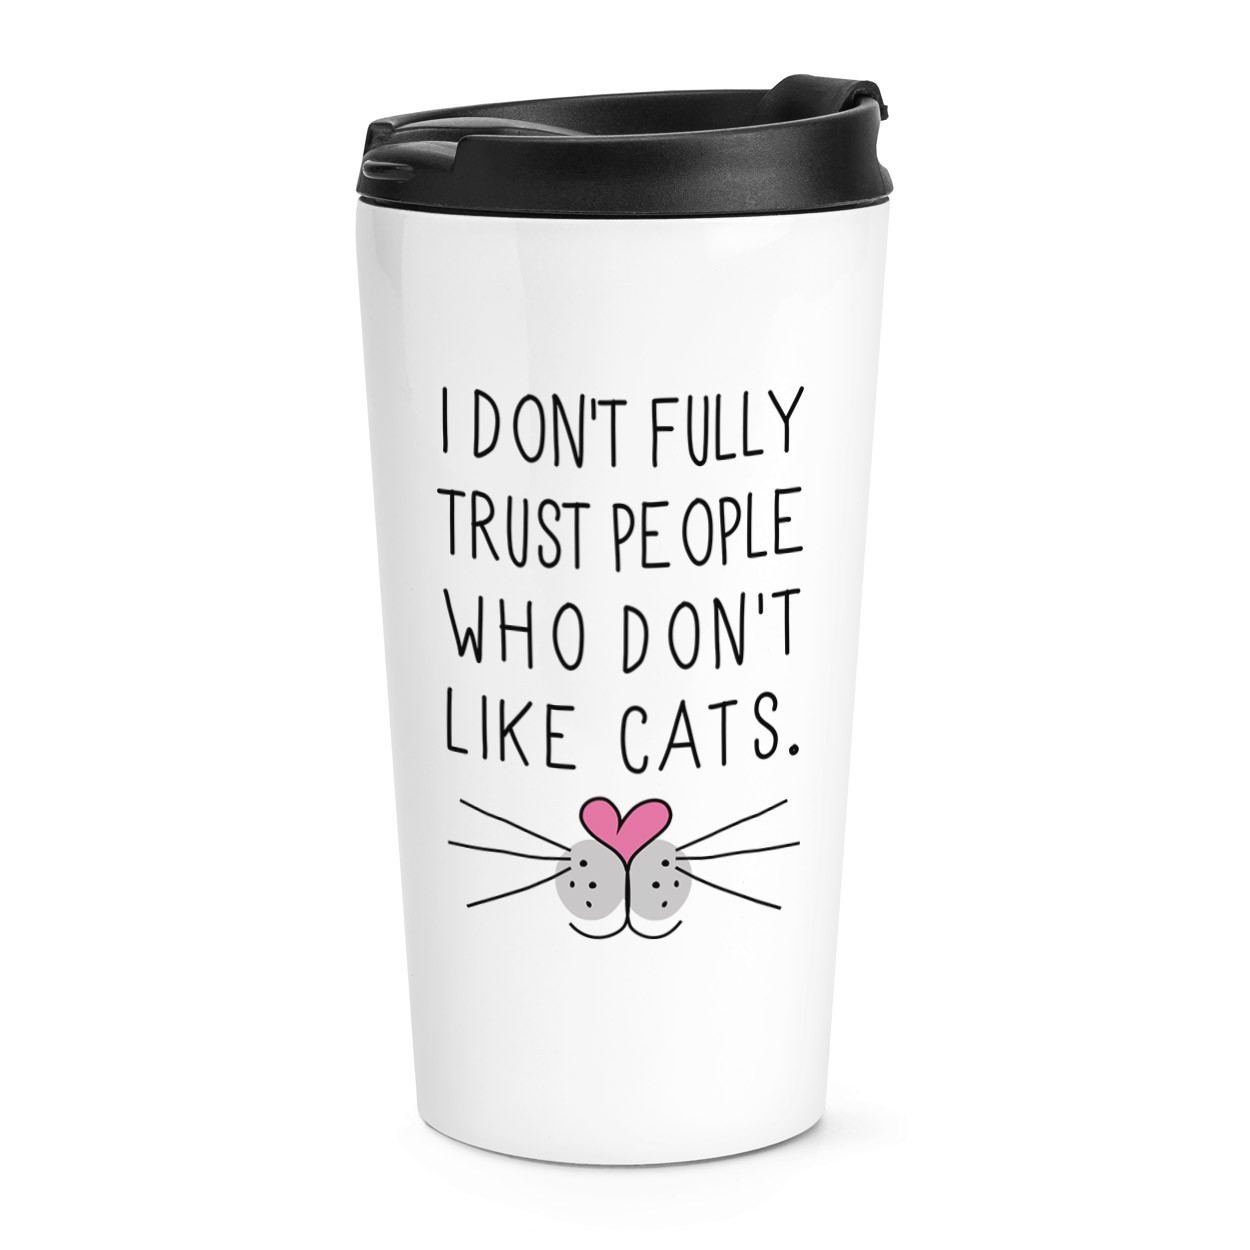 I Don't Fully Trust People Who Don't Like Cats Travel Mug Cup